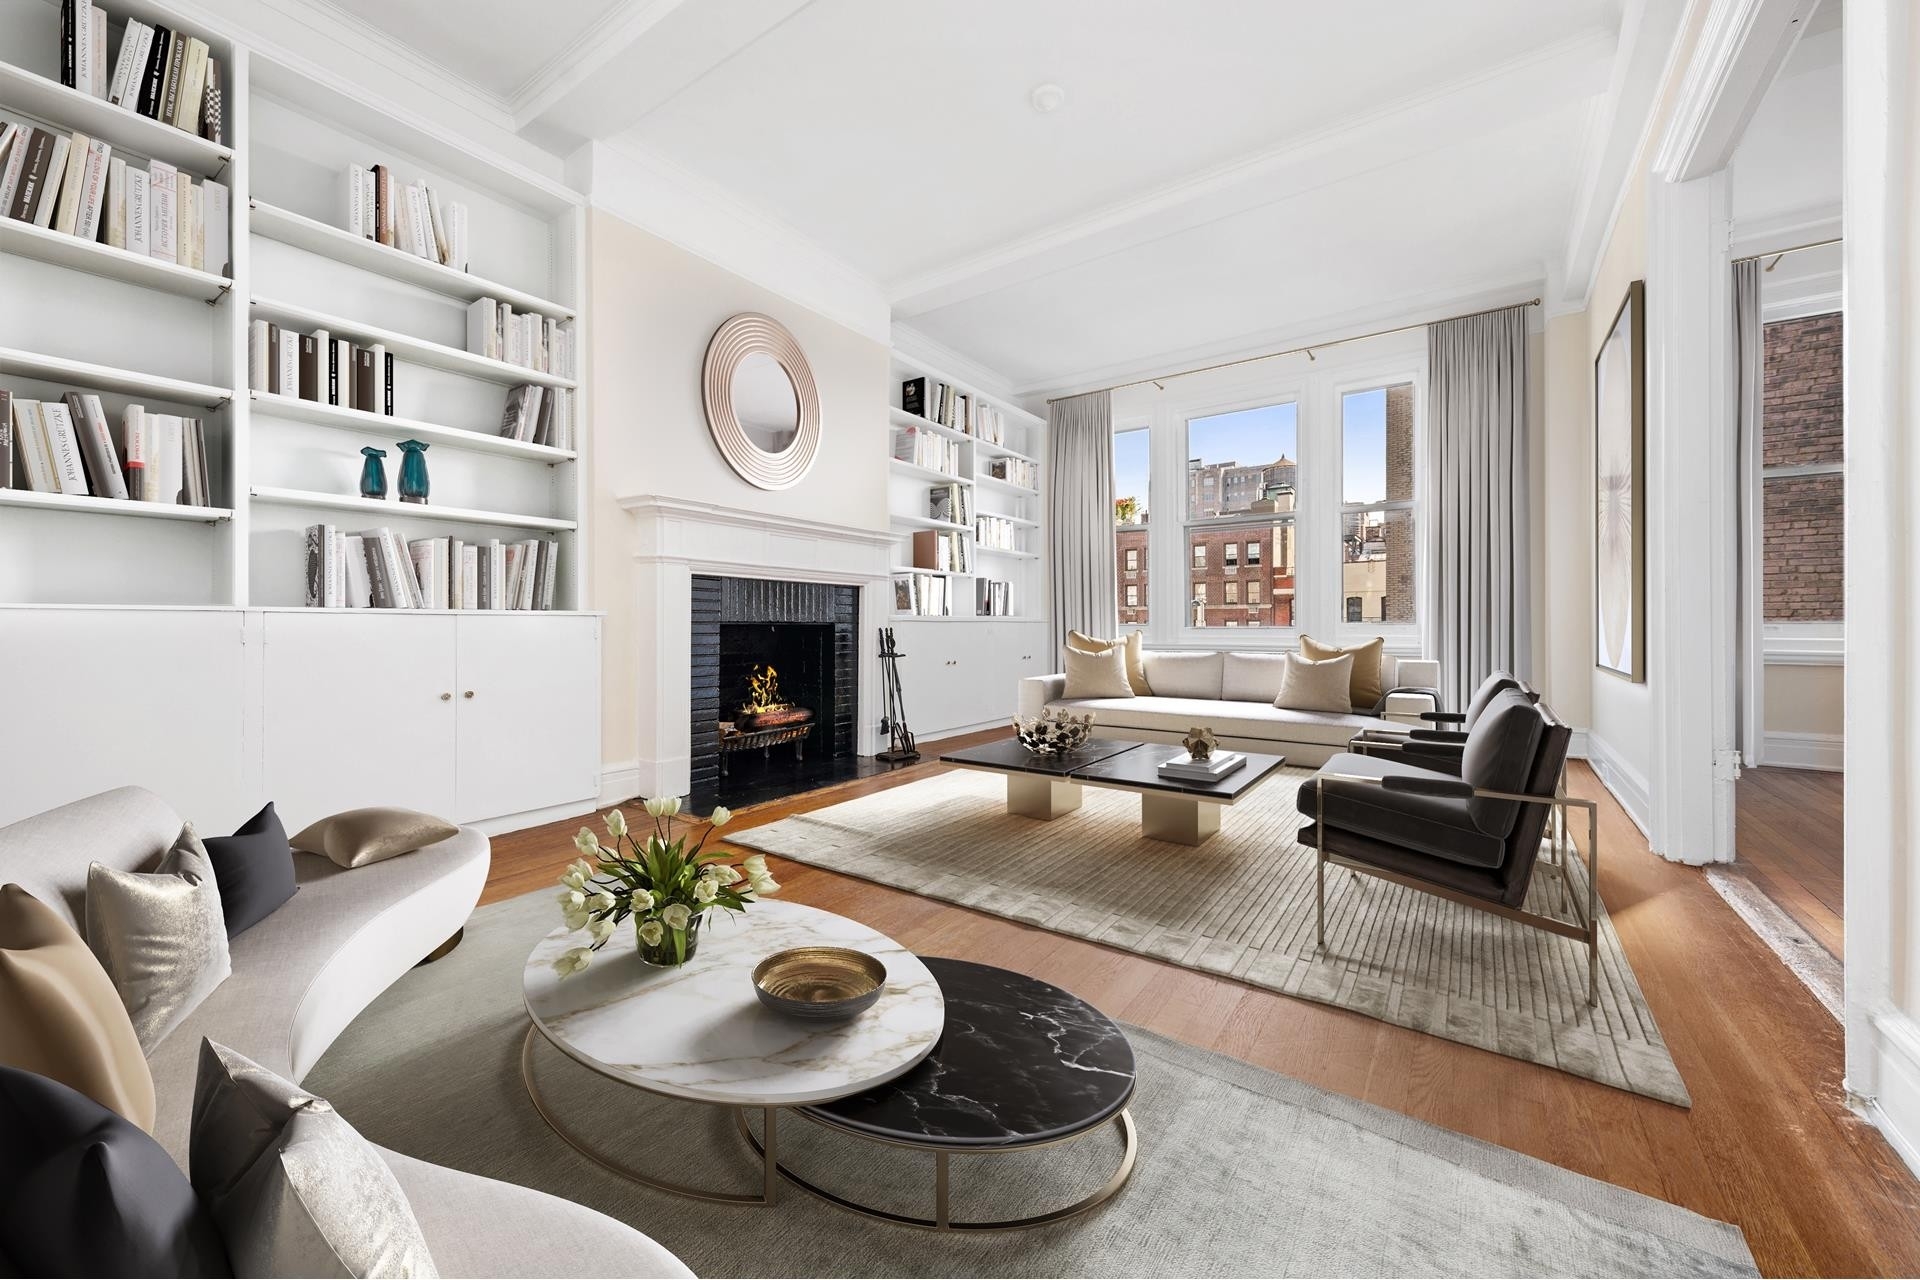 Co-op Properties for Sale at East 82 Corporation, 108 E 82ND ST, 7C Upper East Side, New York, NY 10028